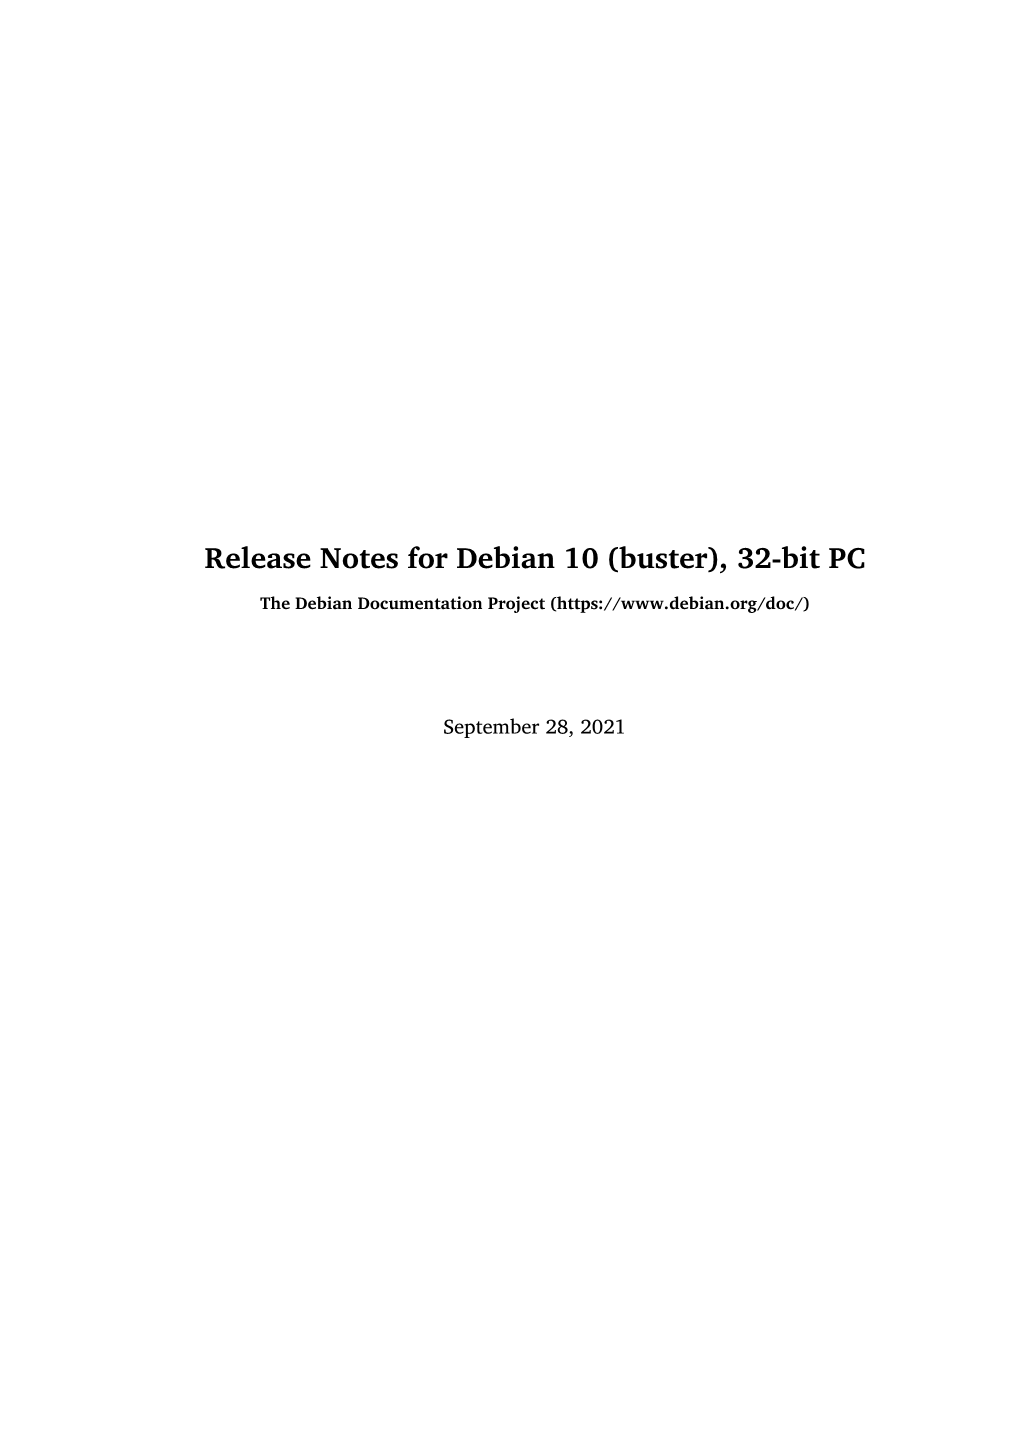 Release Notes for Debian 10 (Buster), 32-Bit PC